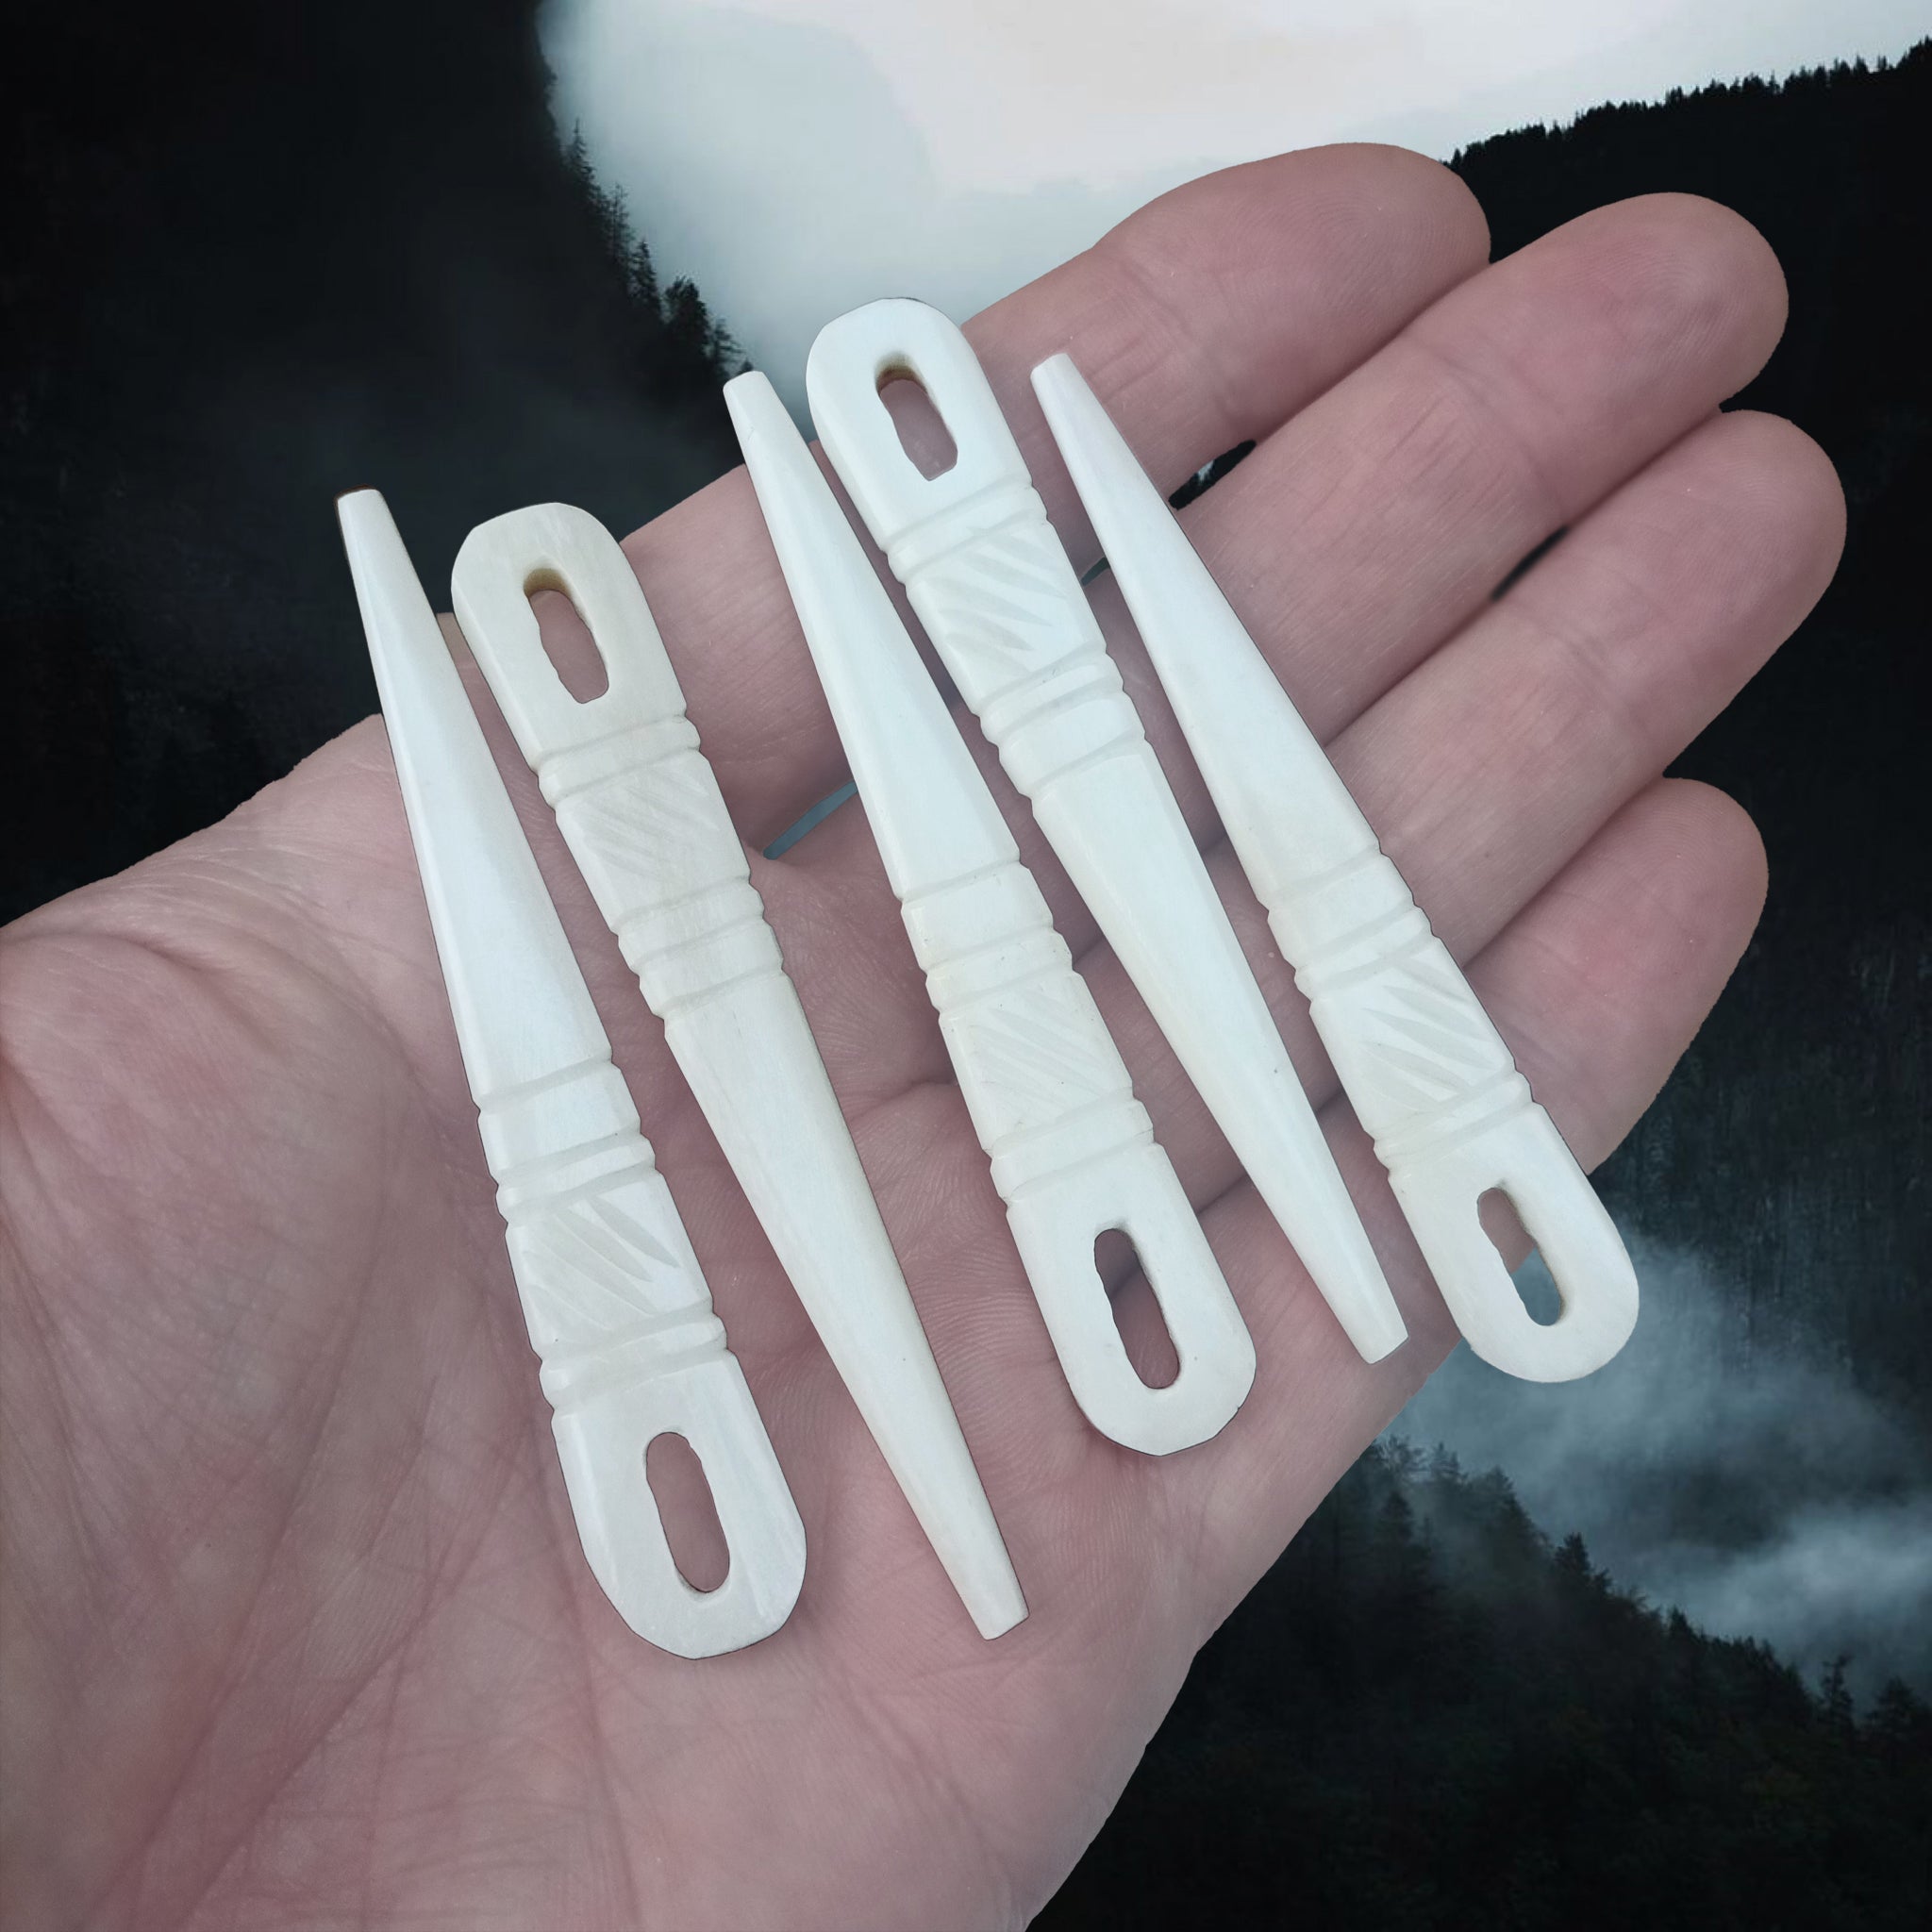 Handmade Bone Viking Nalbinding Needles in Small Size with Hand-Carved Decorations